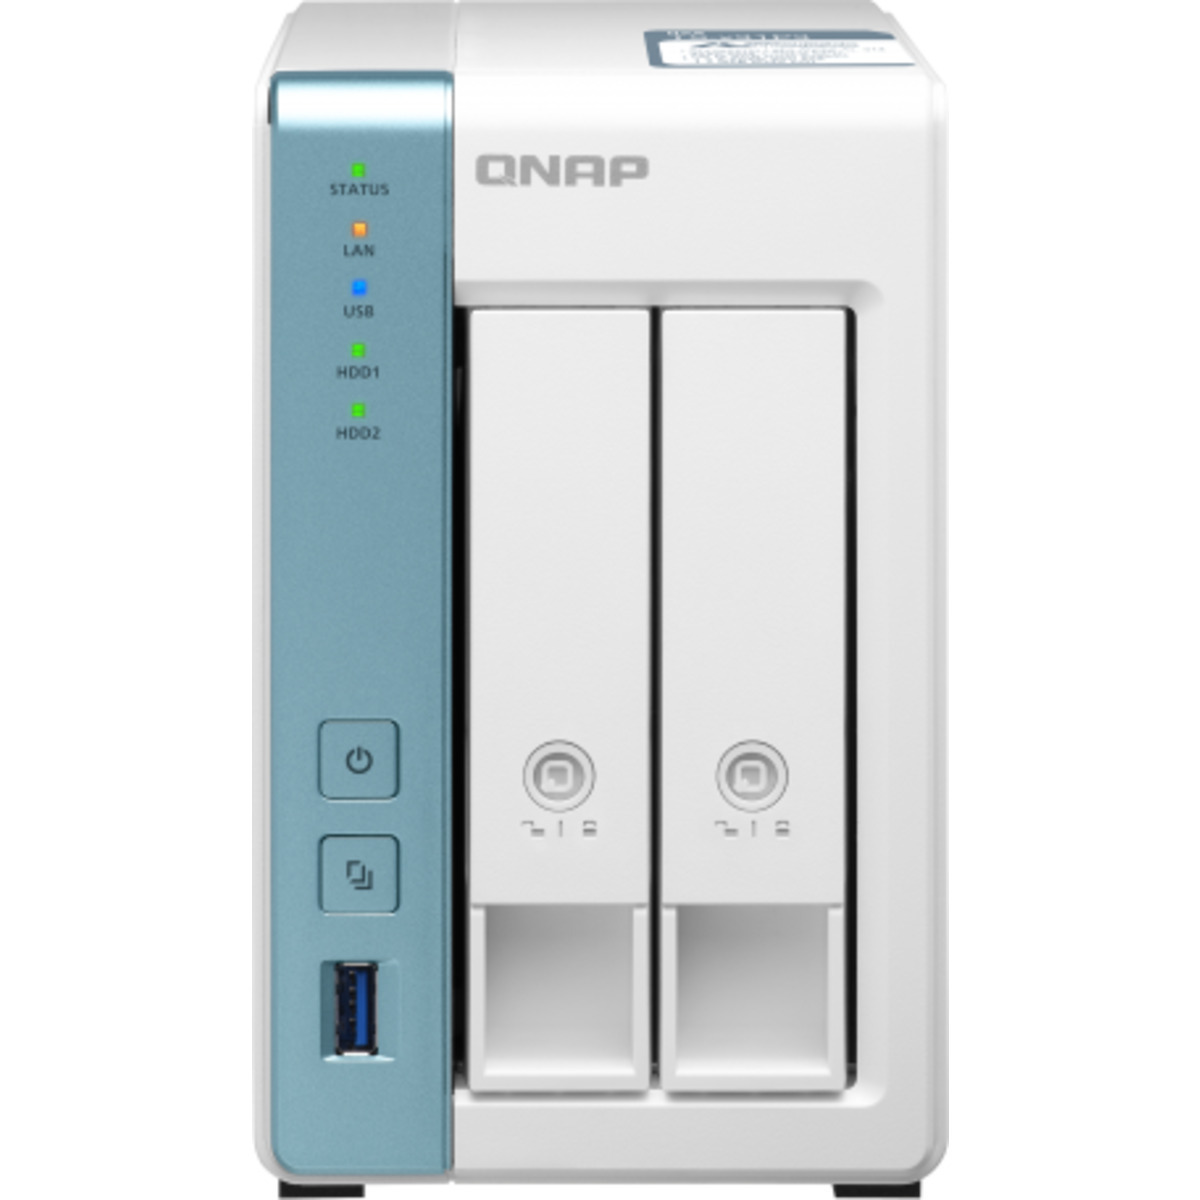 buy $996 QNAP TS-231P3 4tb Desktop NAS - Network Attached Storage Device 2x2000gb Western Digital Red SA500 WDS200T1R0A 2.5 SATA 6Gb/s SSD NAS Class Drives Installed - Burn-In Tested - FREE RAM UPGRADE - nas headquarters buy network attached storage server device das new raid-5 free shipping usa TS-231P3